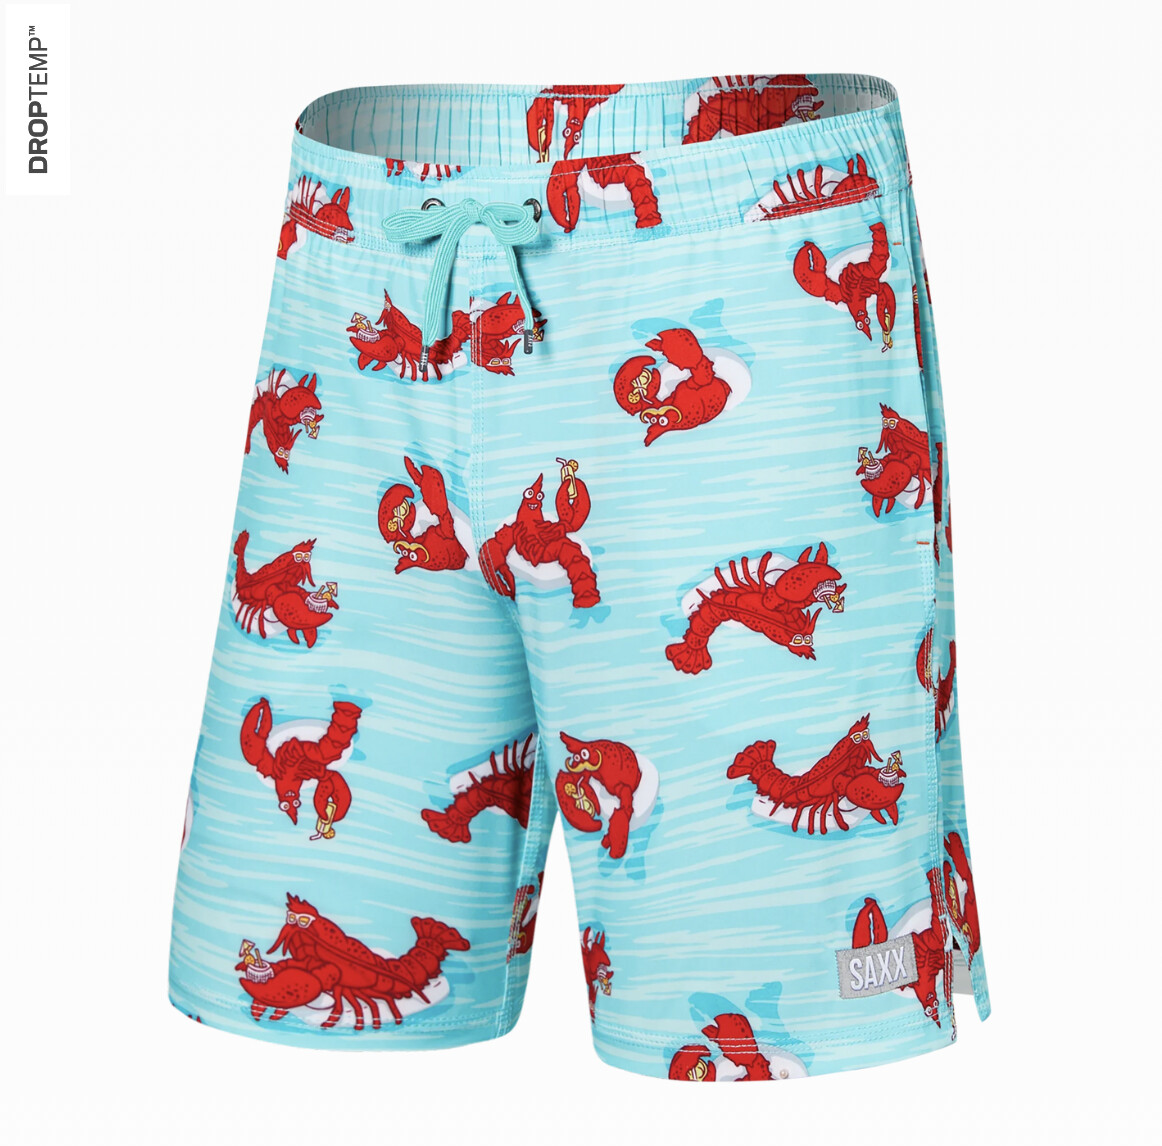 SAXX Oh Buoy 7" Lobster Lounger